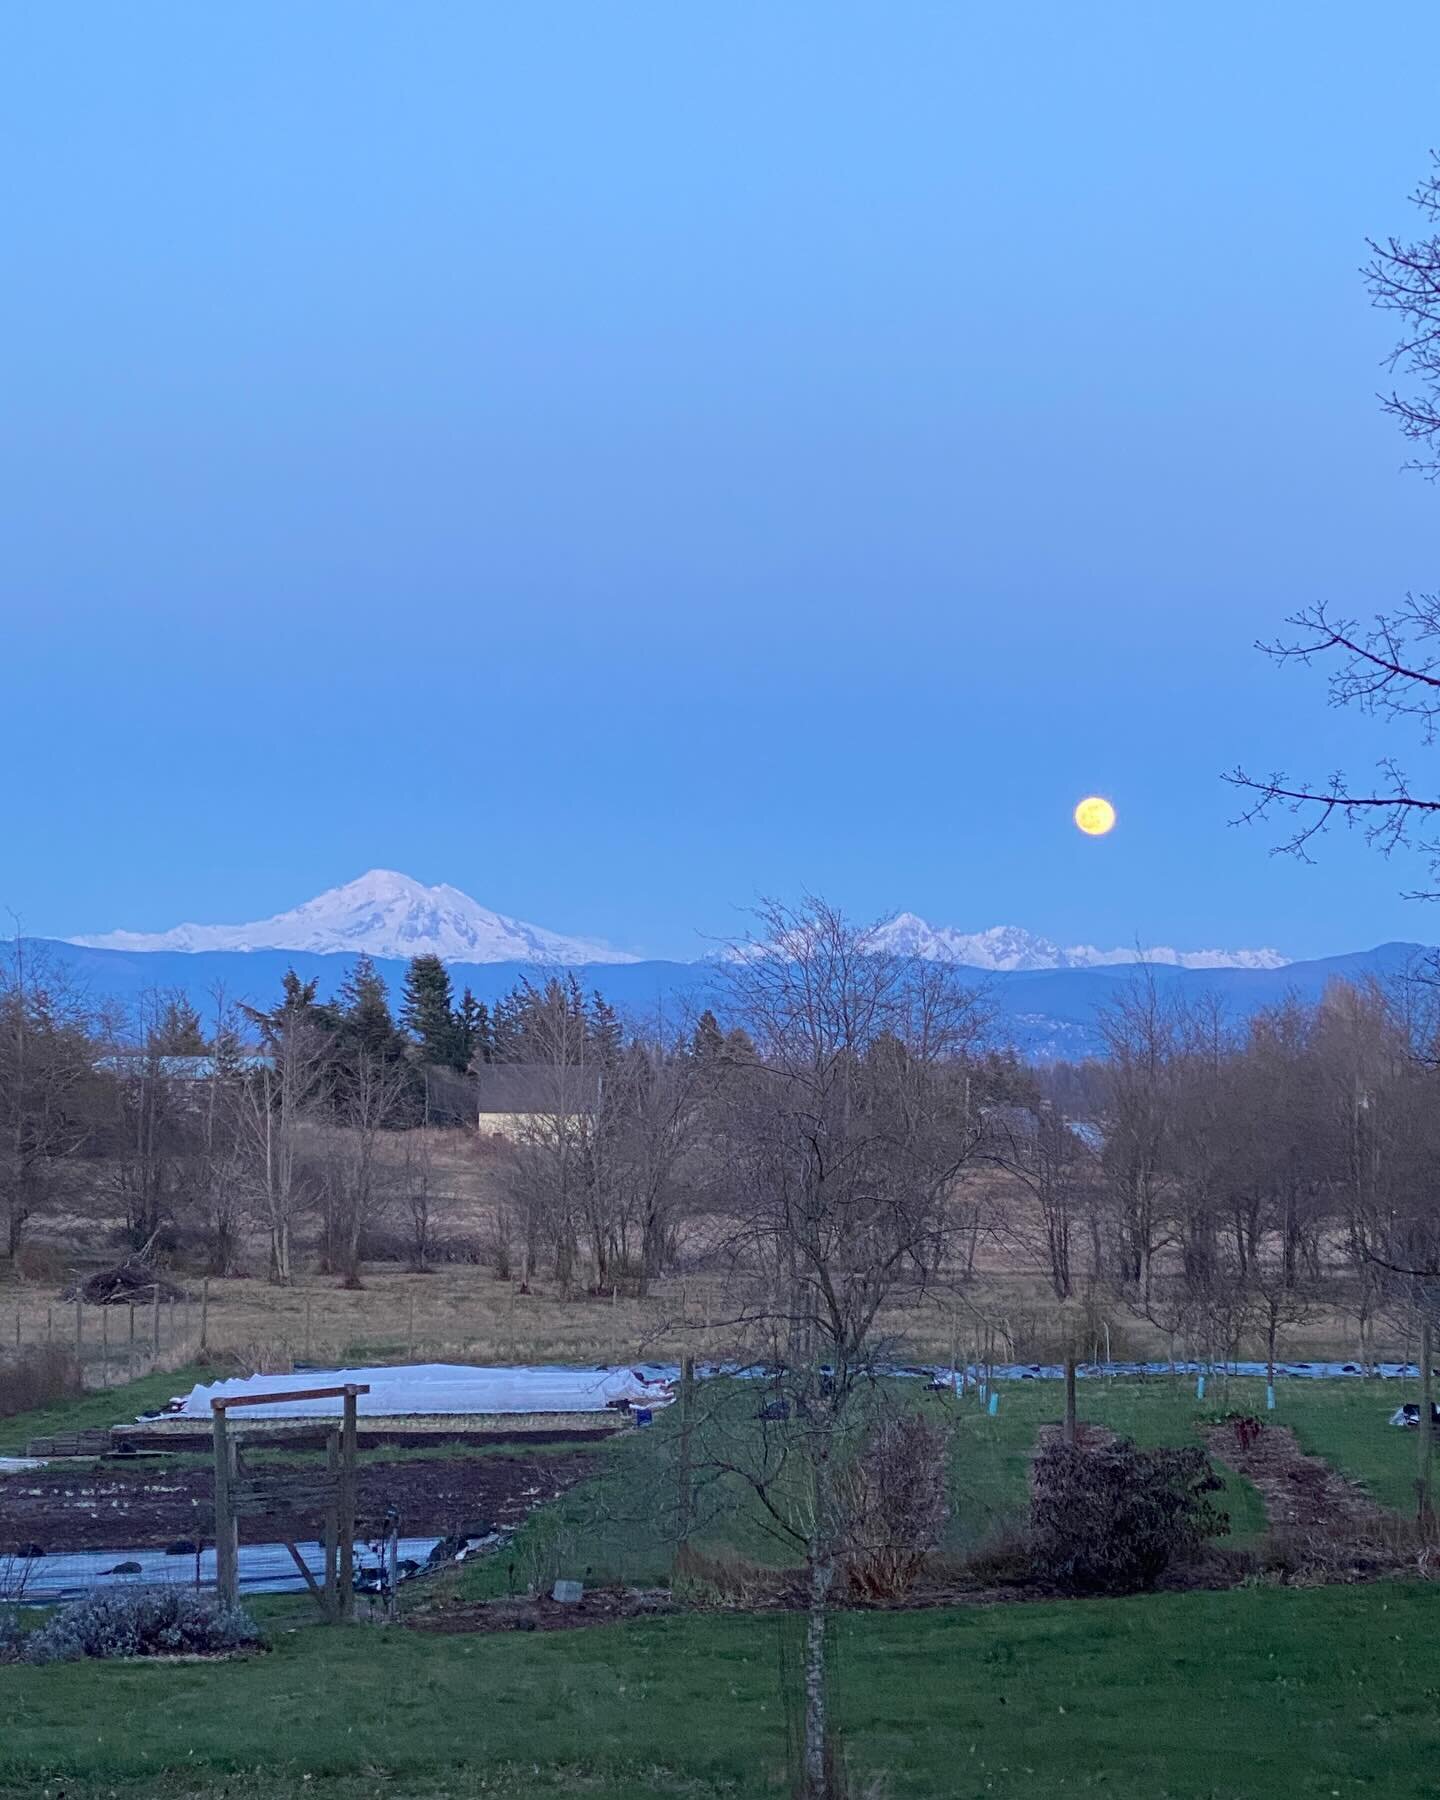 The first full moon of spring after a big day under the sun.